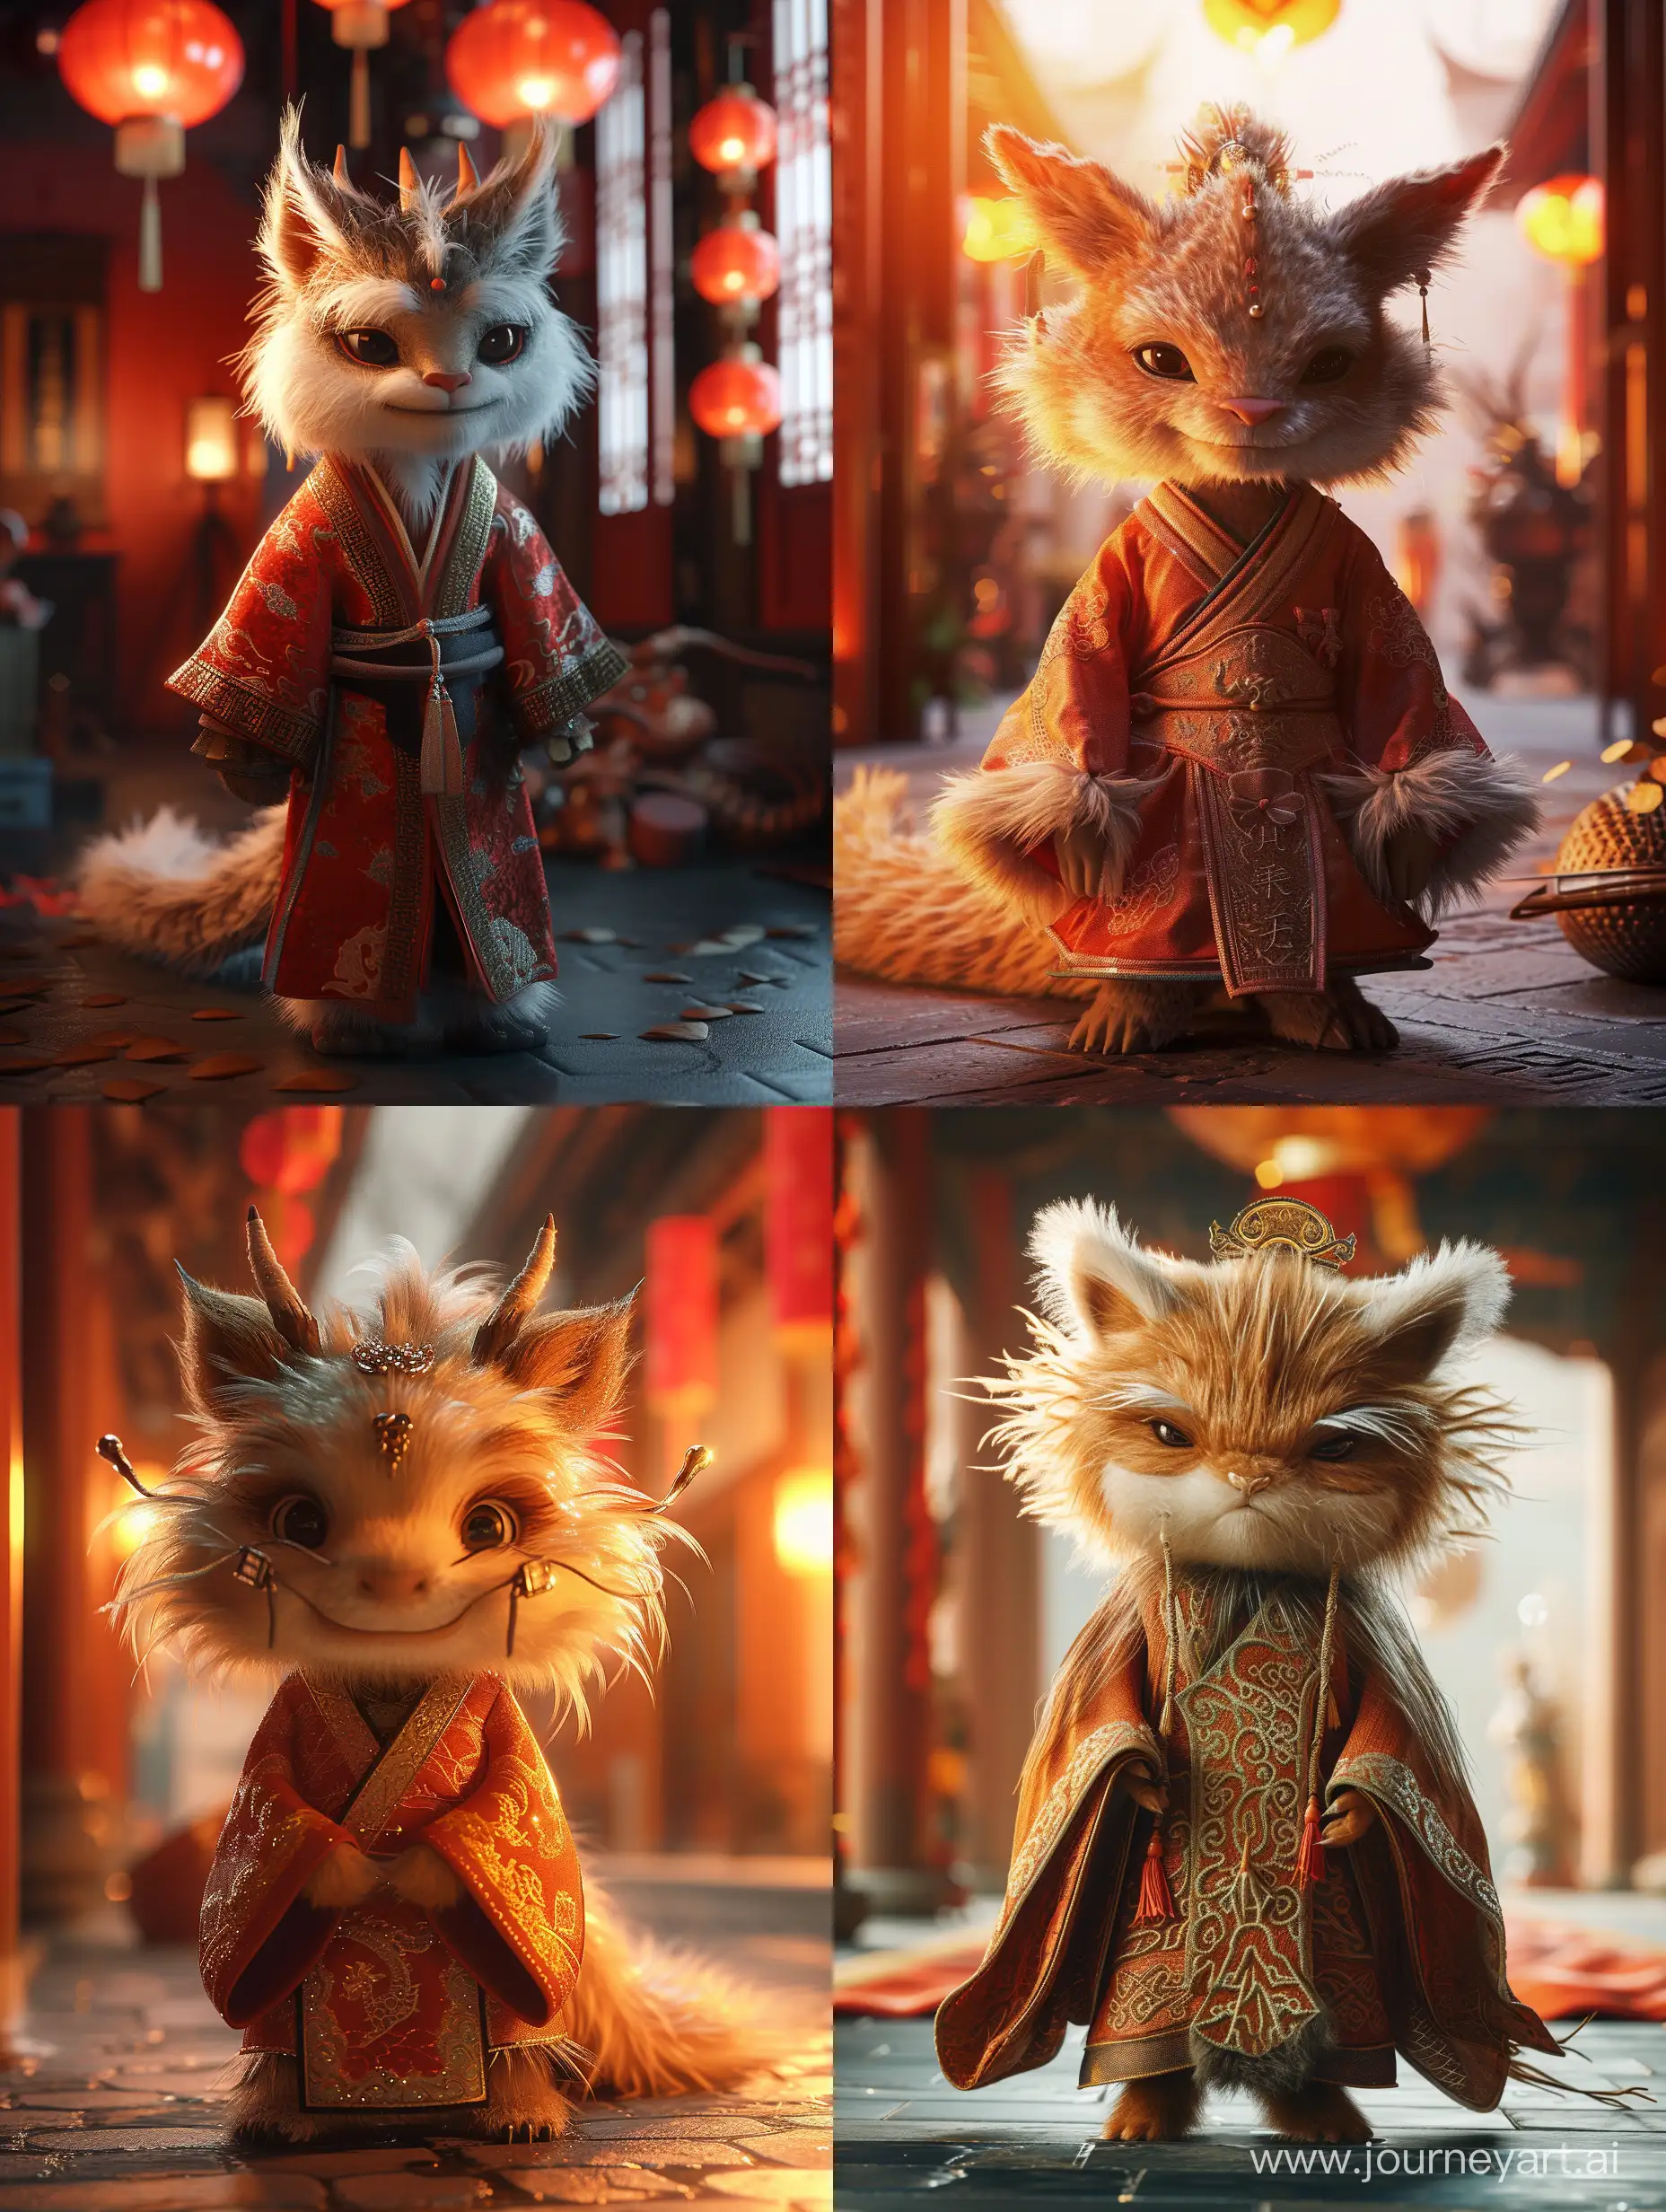 Adorable-Chinese-Dragon-in-Traditional-Robes-Cute-3D-Animation-with-Stunning-Lighting-Effects